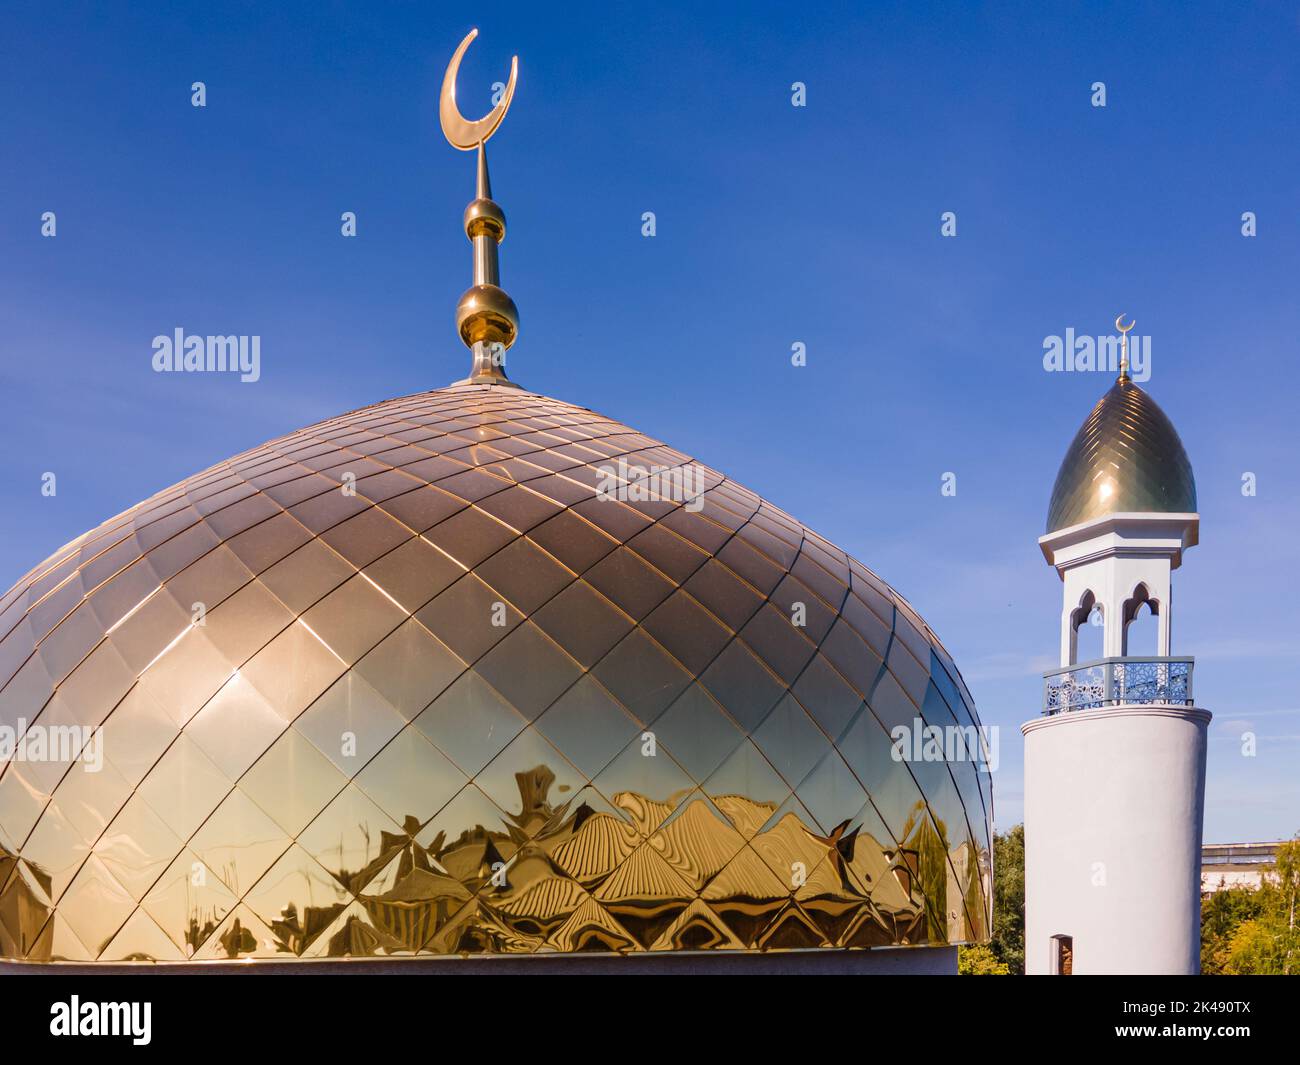 A Muslim golden dome with a crescent moon on the mosque. Minaret against the sky. Arab day. Islamic symbols of religion. Faith in Allah. Crescent moon Stock Photo